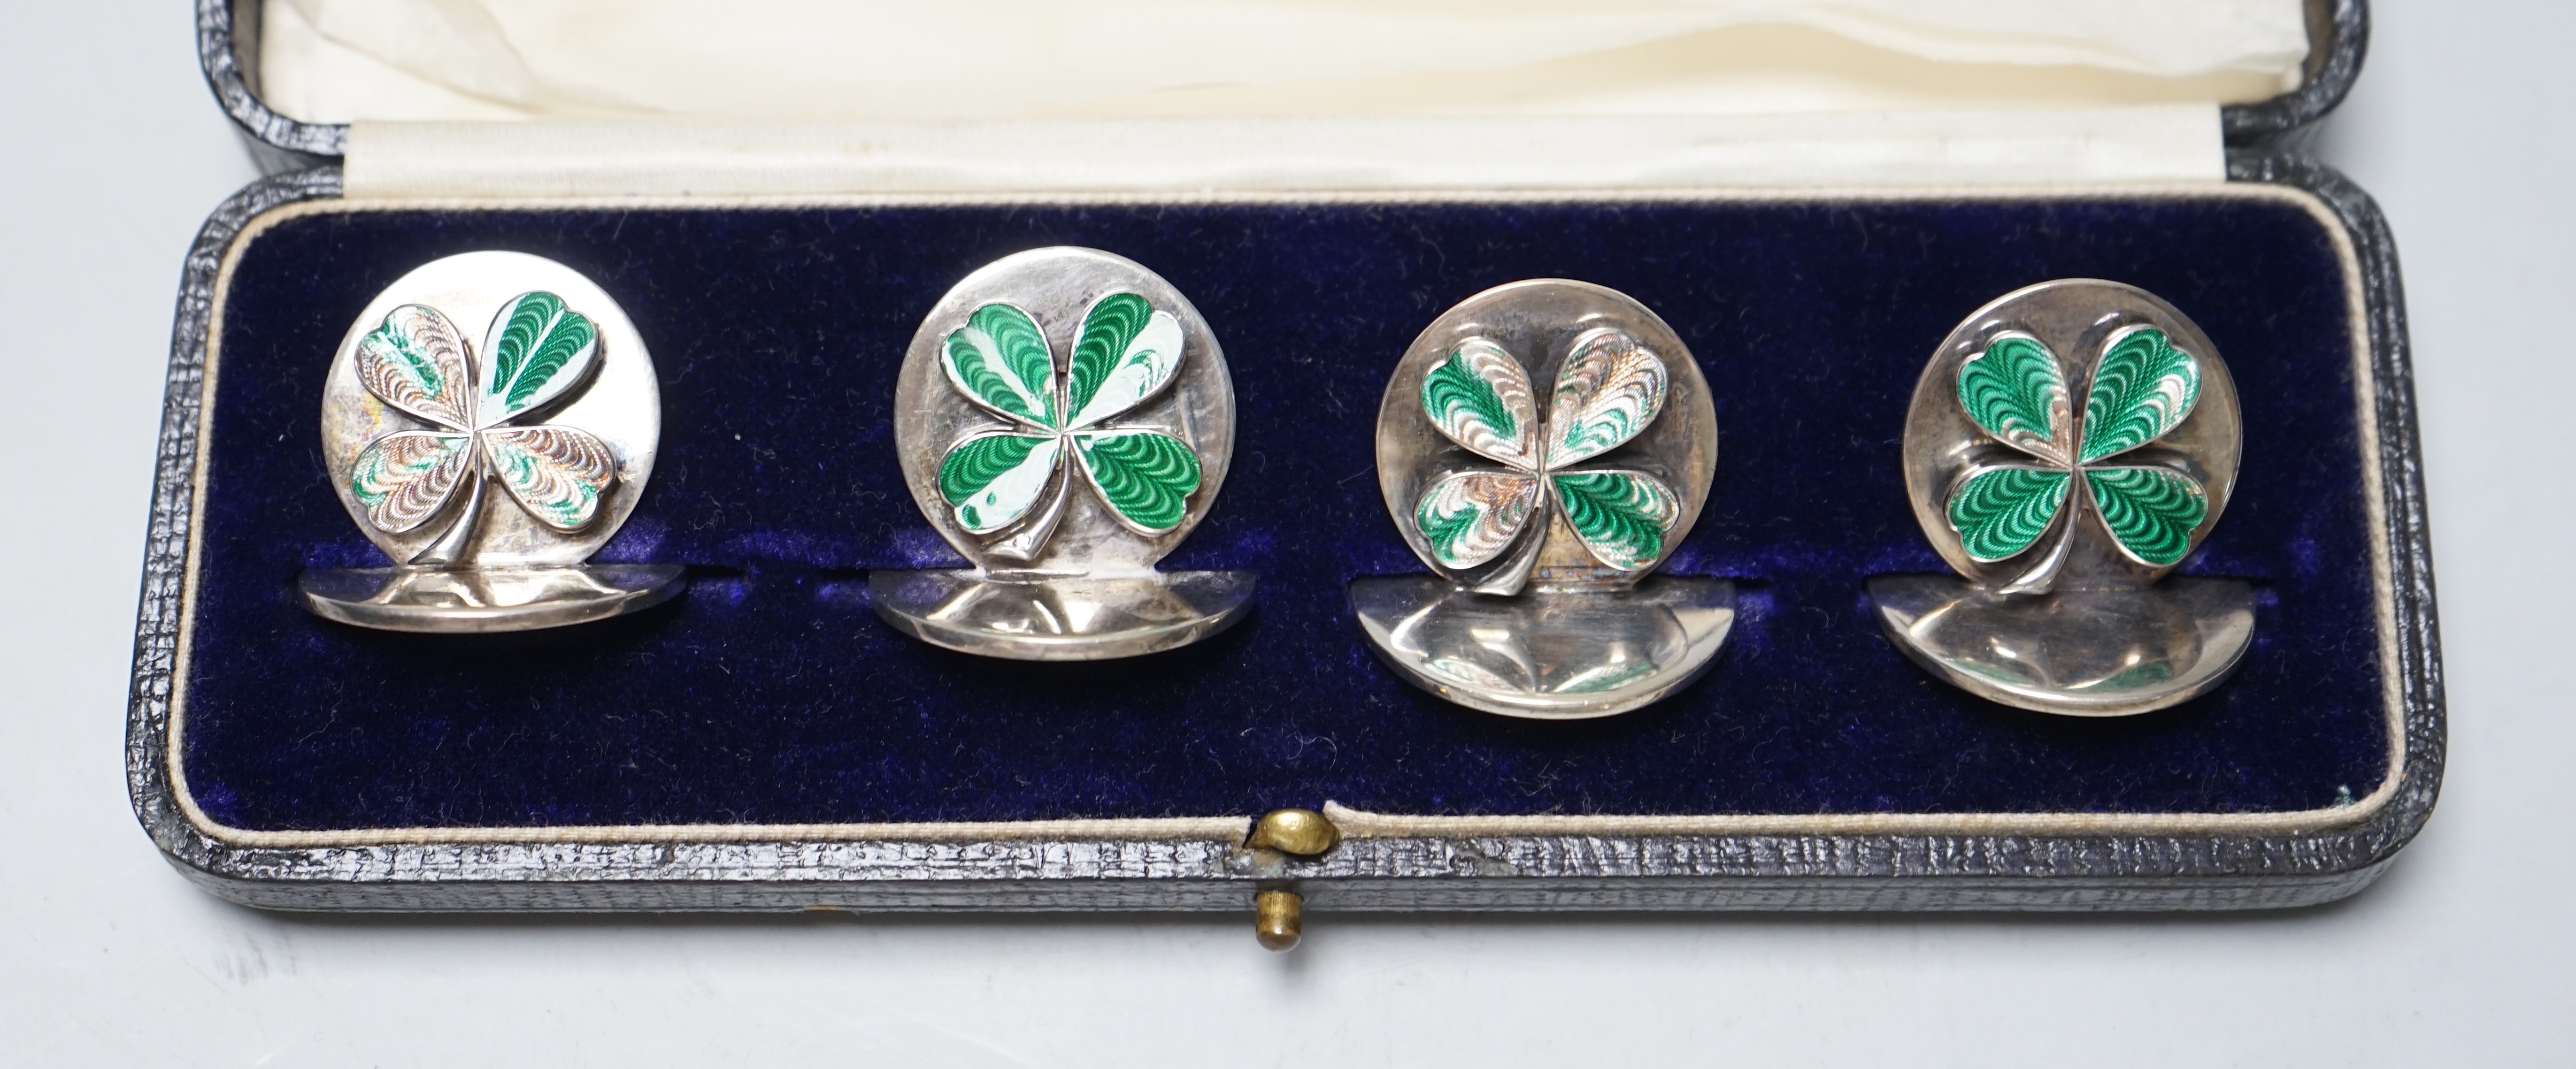 A cased set of four George V enamelled silver menu holders, decorated with four leaf clovers, by Sampson Morden & Company (a.f.), diameter 31mm.                                                                            